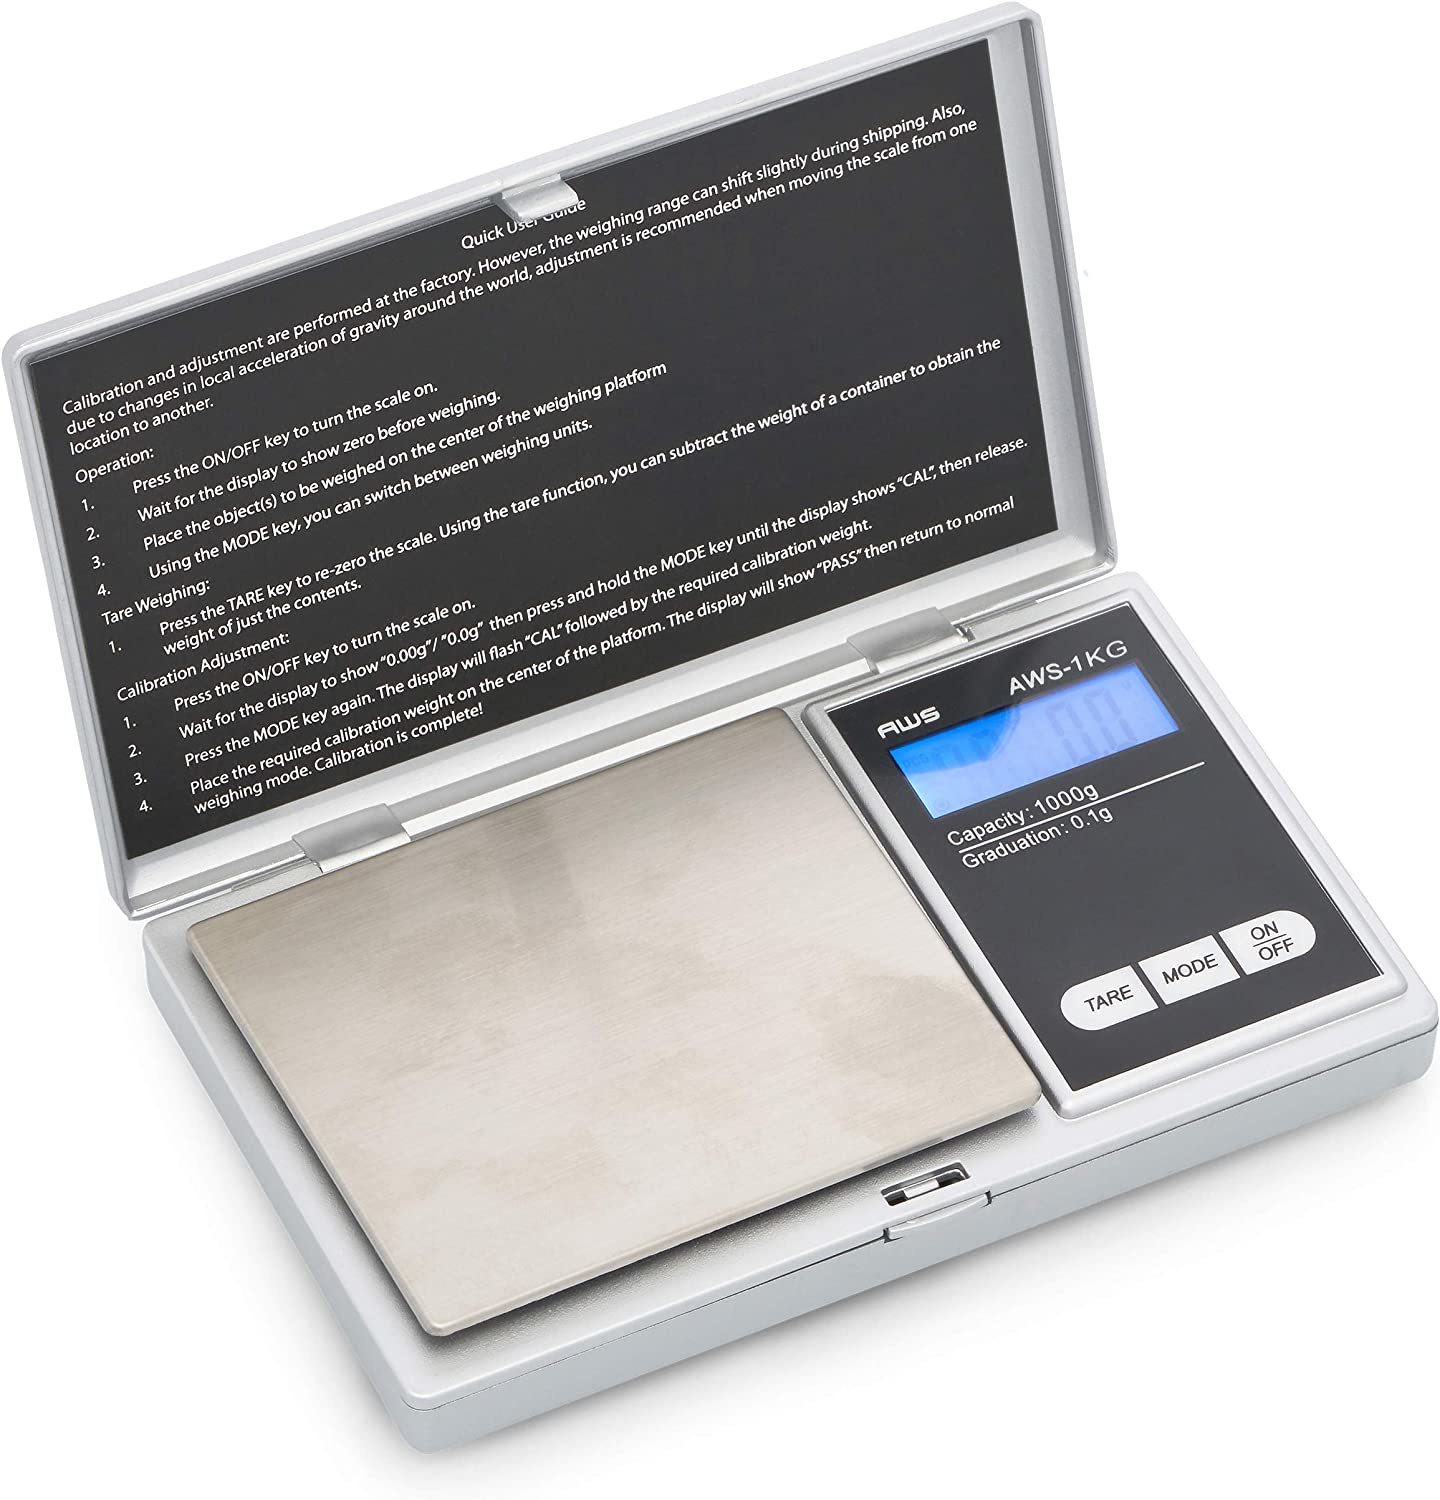 SC Series Precision Digital Kitchen Weight Scale, Food Measuring Scale, 2kg  x 0.1g (Silver), AMW-SC-2KG - American WEIGH Scale